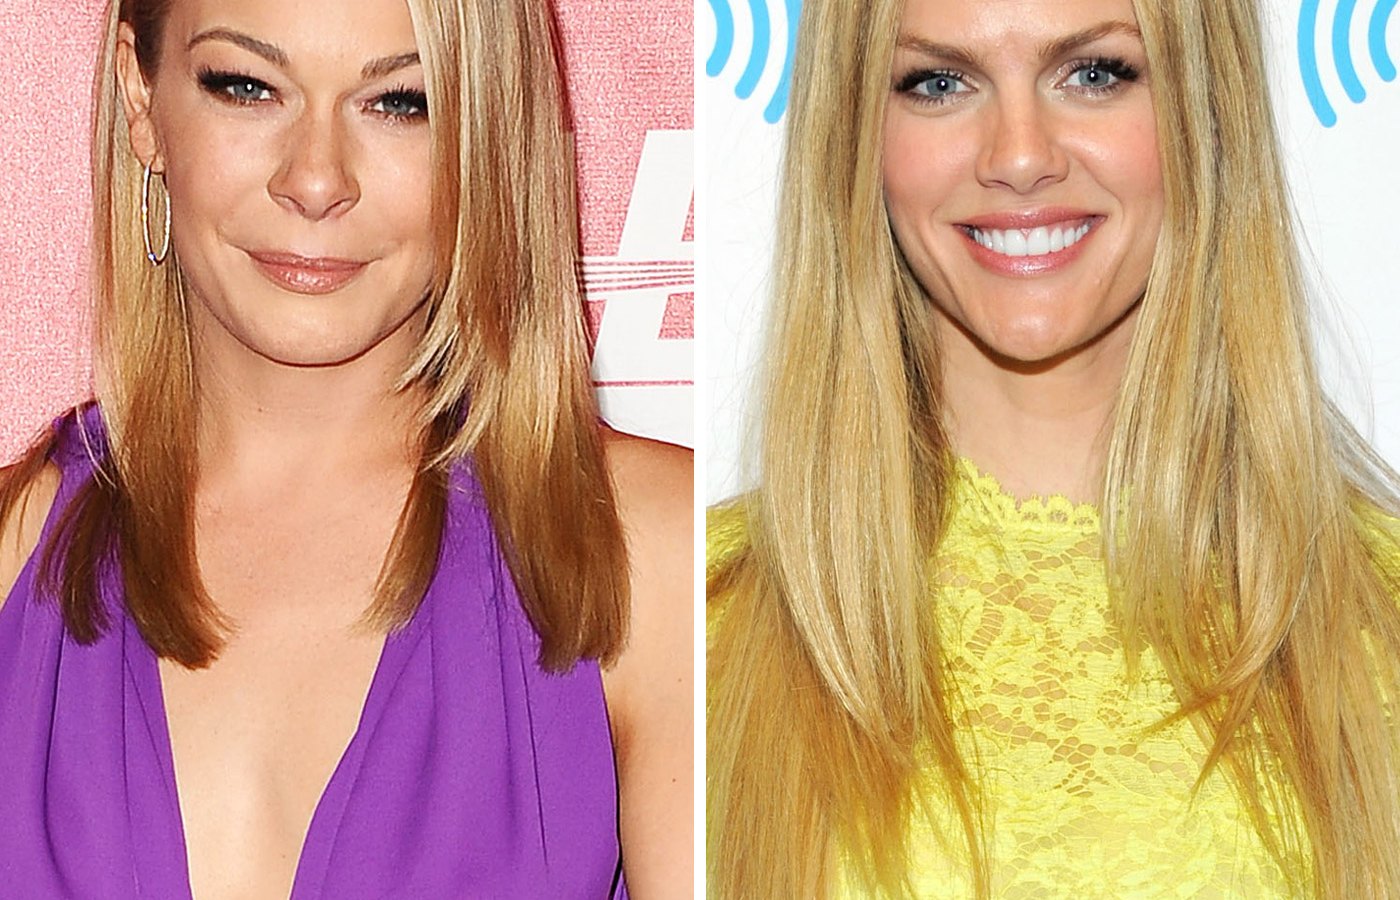 LeAnn Rimes and Brooklyn Decker to present at CMT Music Awards.